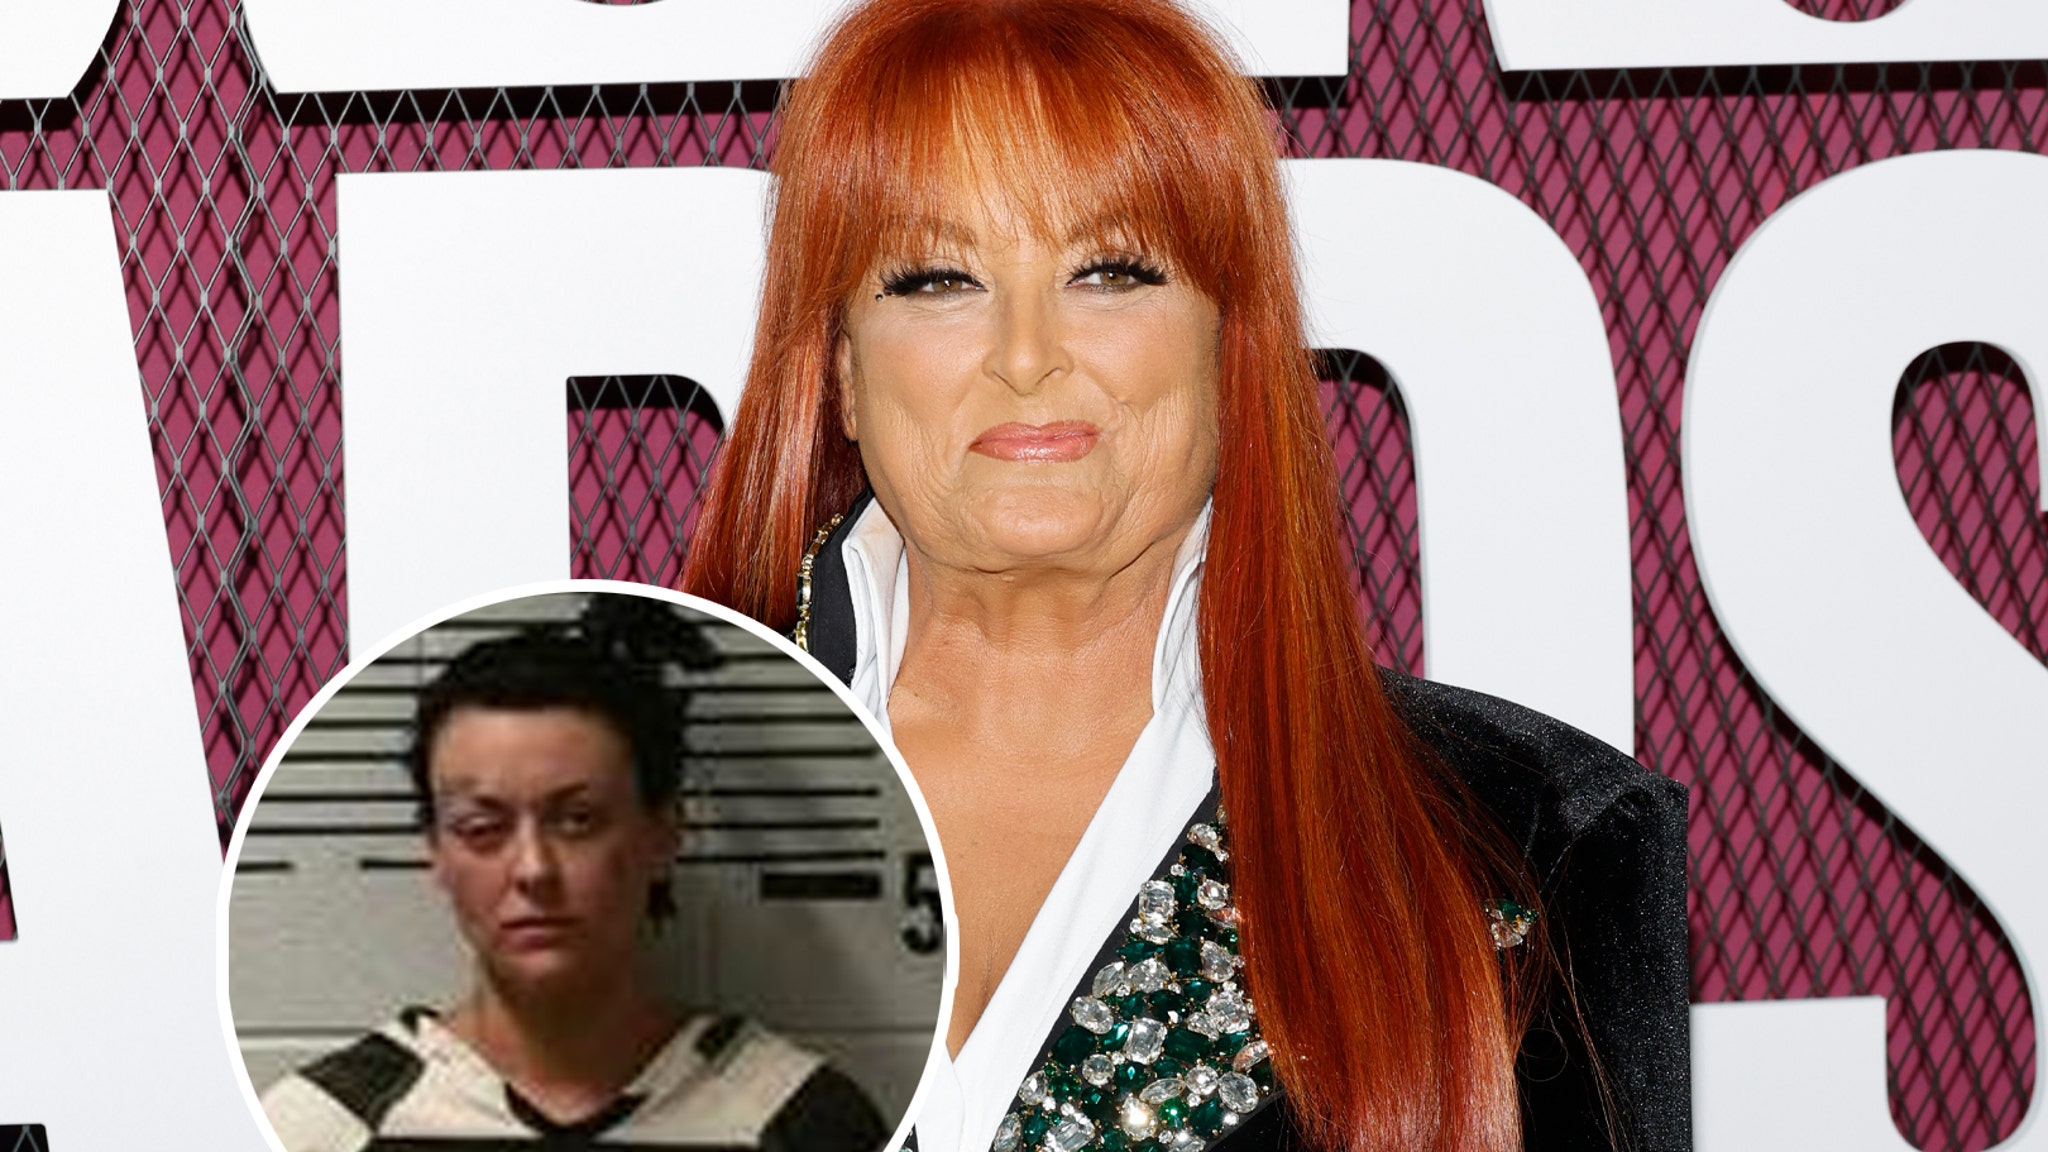 Wynonna Judd's Daughter Grace Kelley Also Charged with Soliciting After Indecent Exposure Arrest